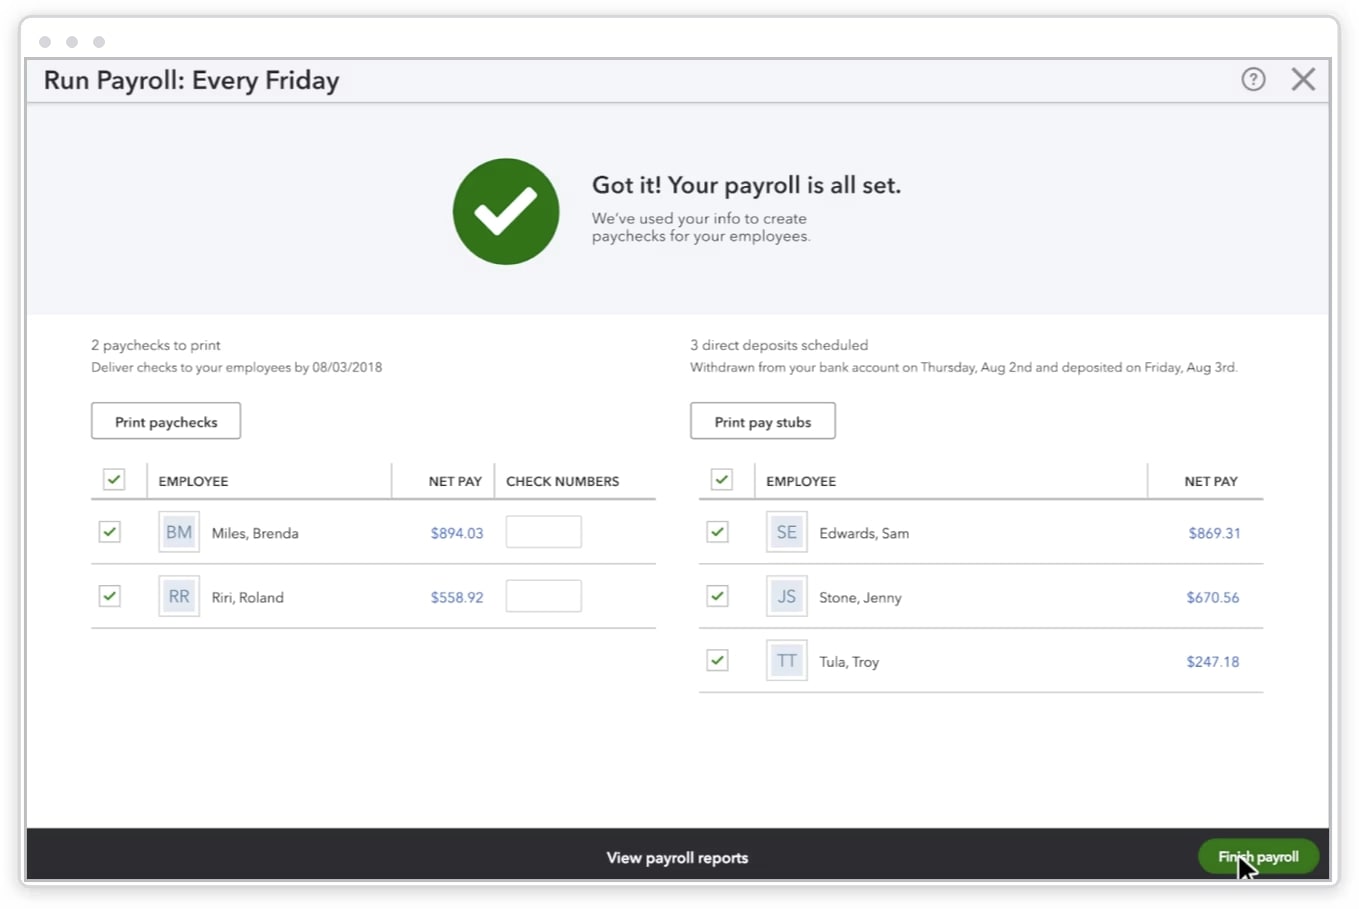 QuickBooks Payroll offers payroll automation